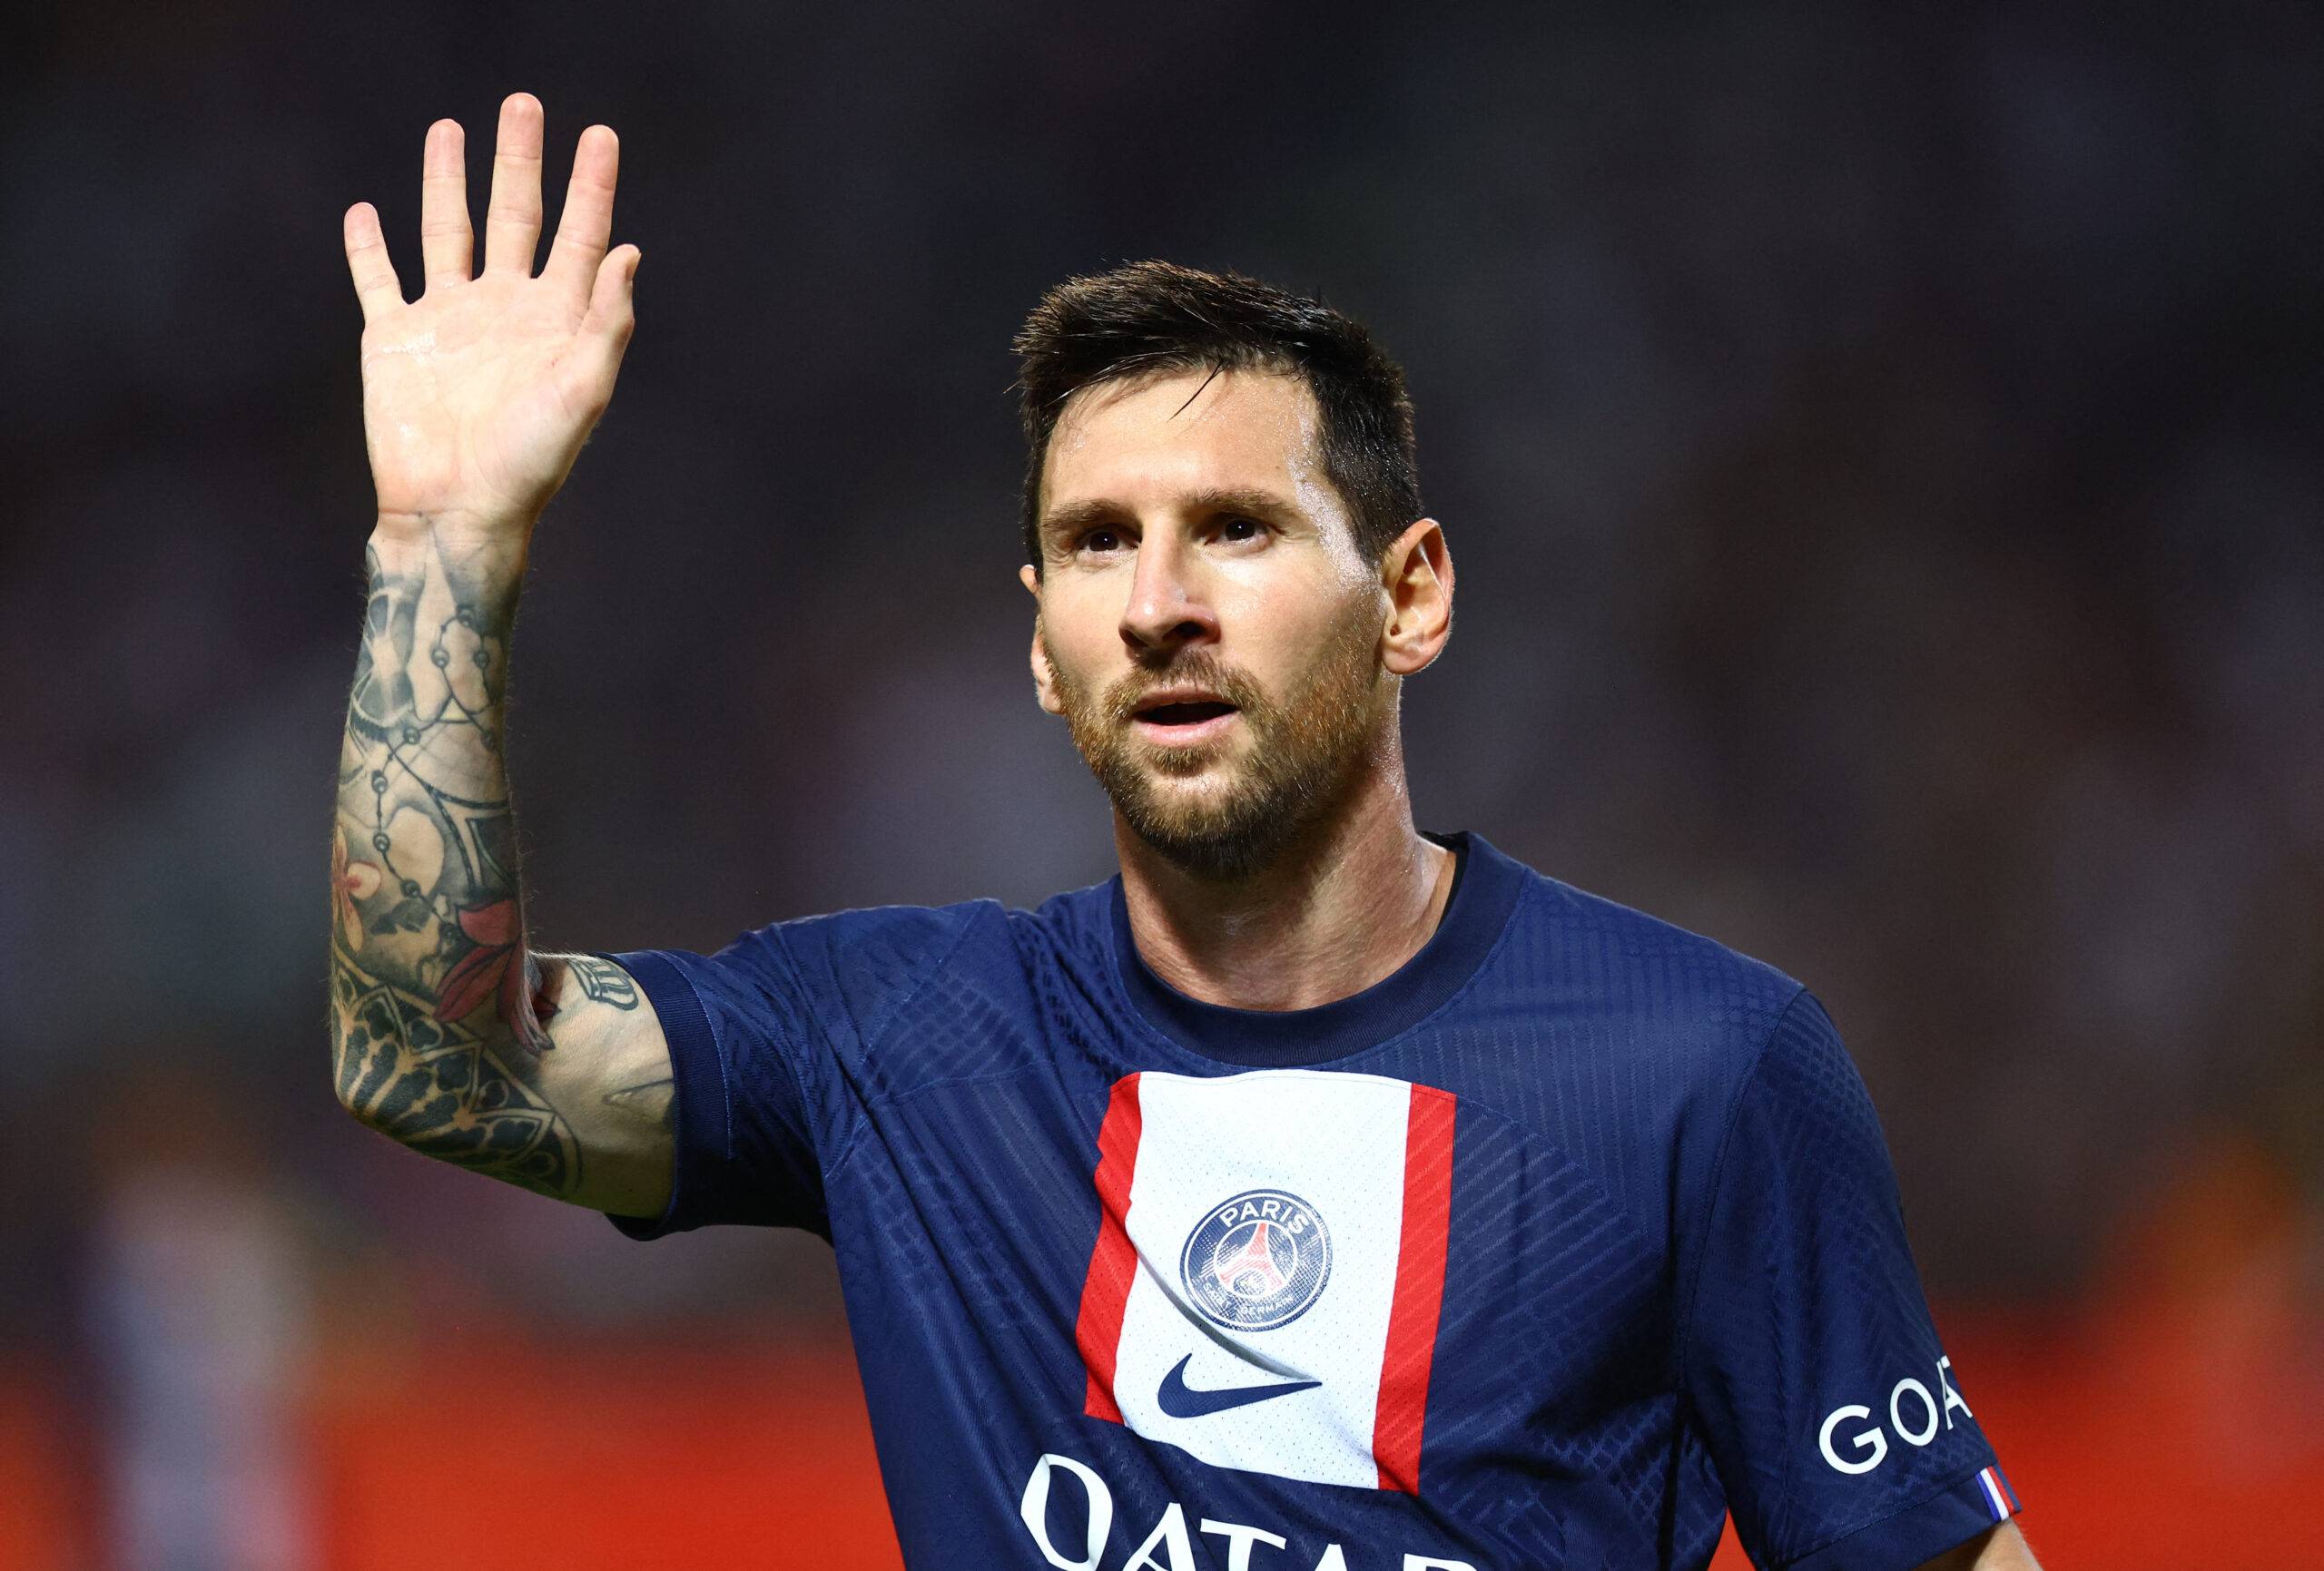 Lionel Messi edges closer to becoming the player with the most trophies in football history